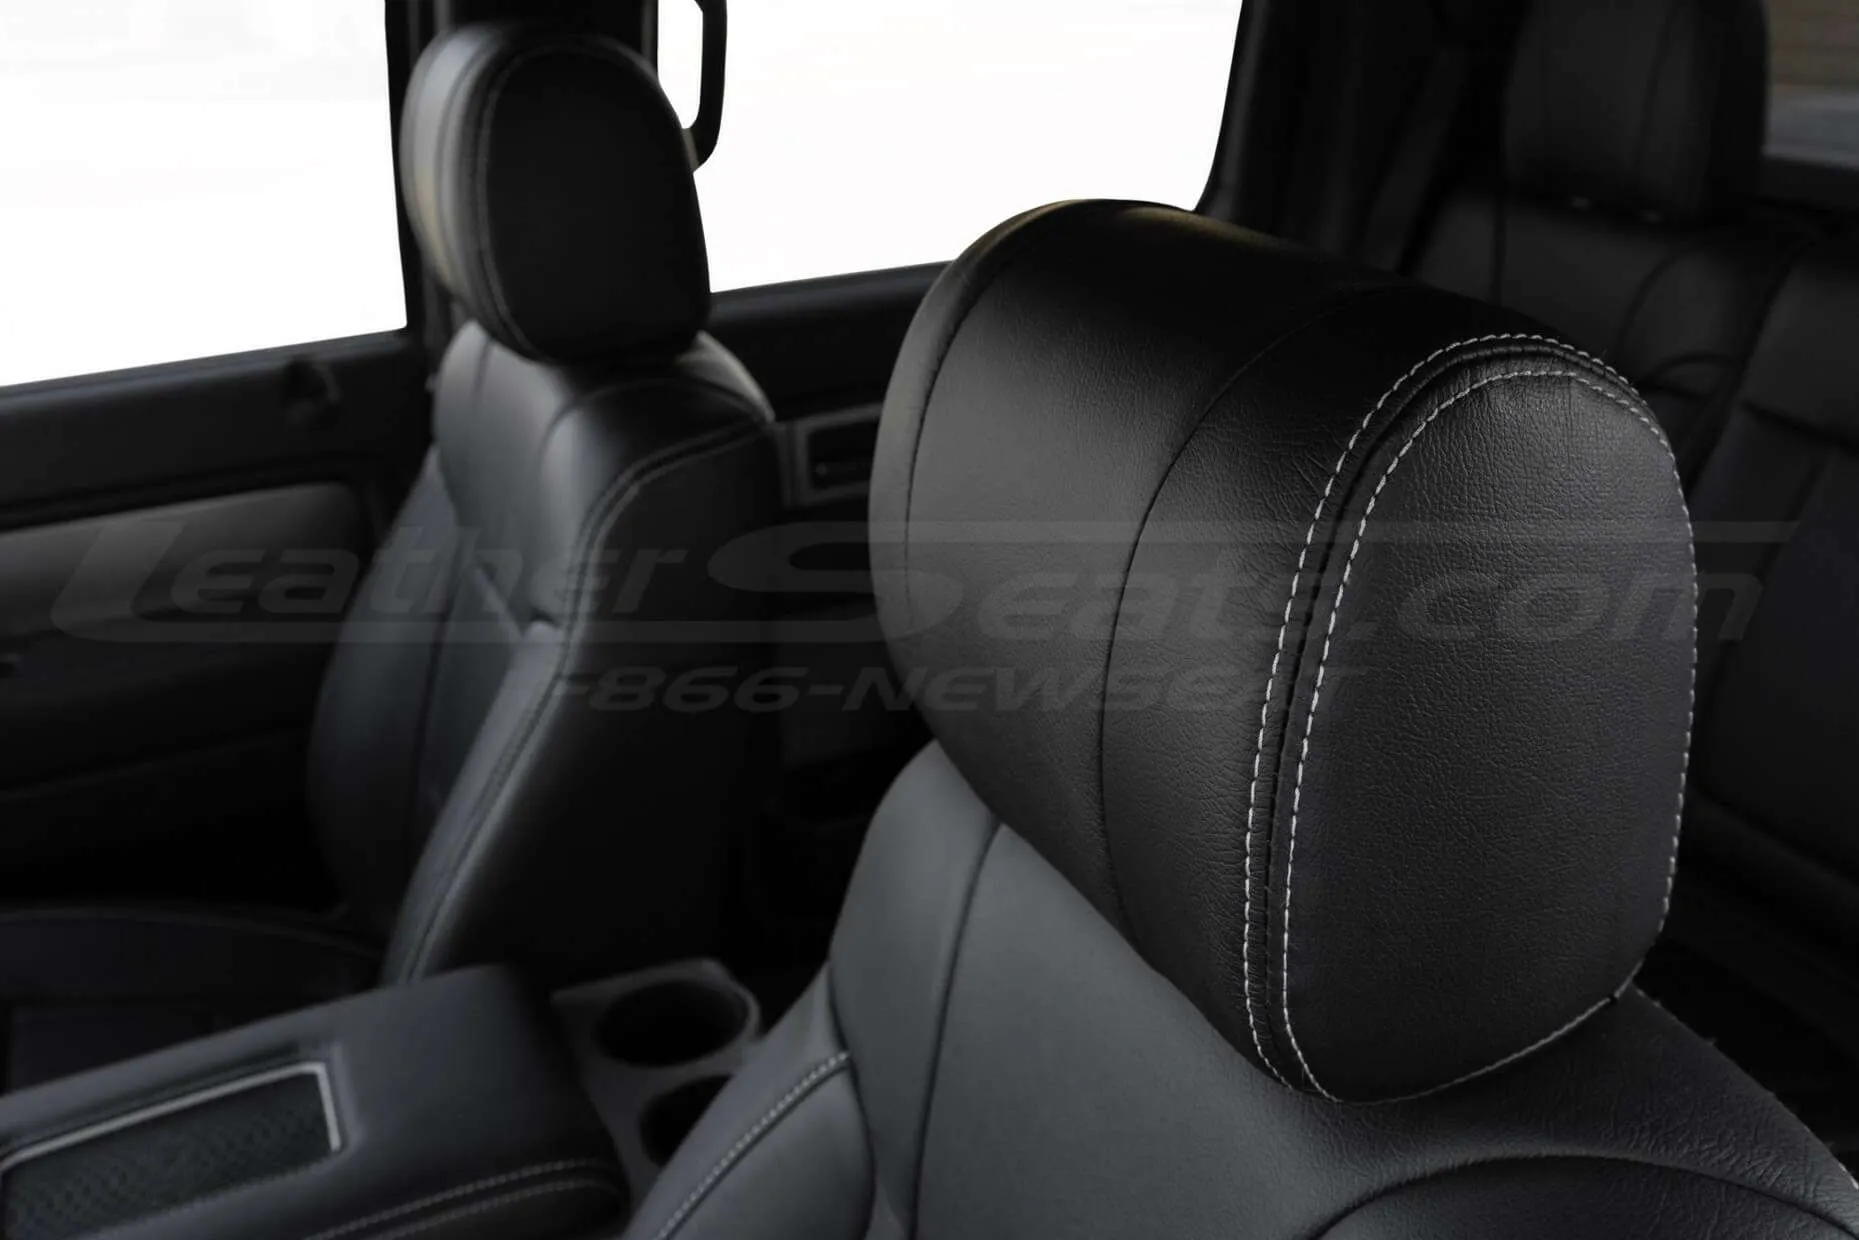 Front leather headrest with silver stitching close-up